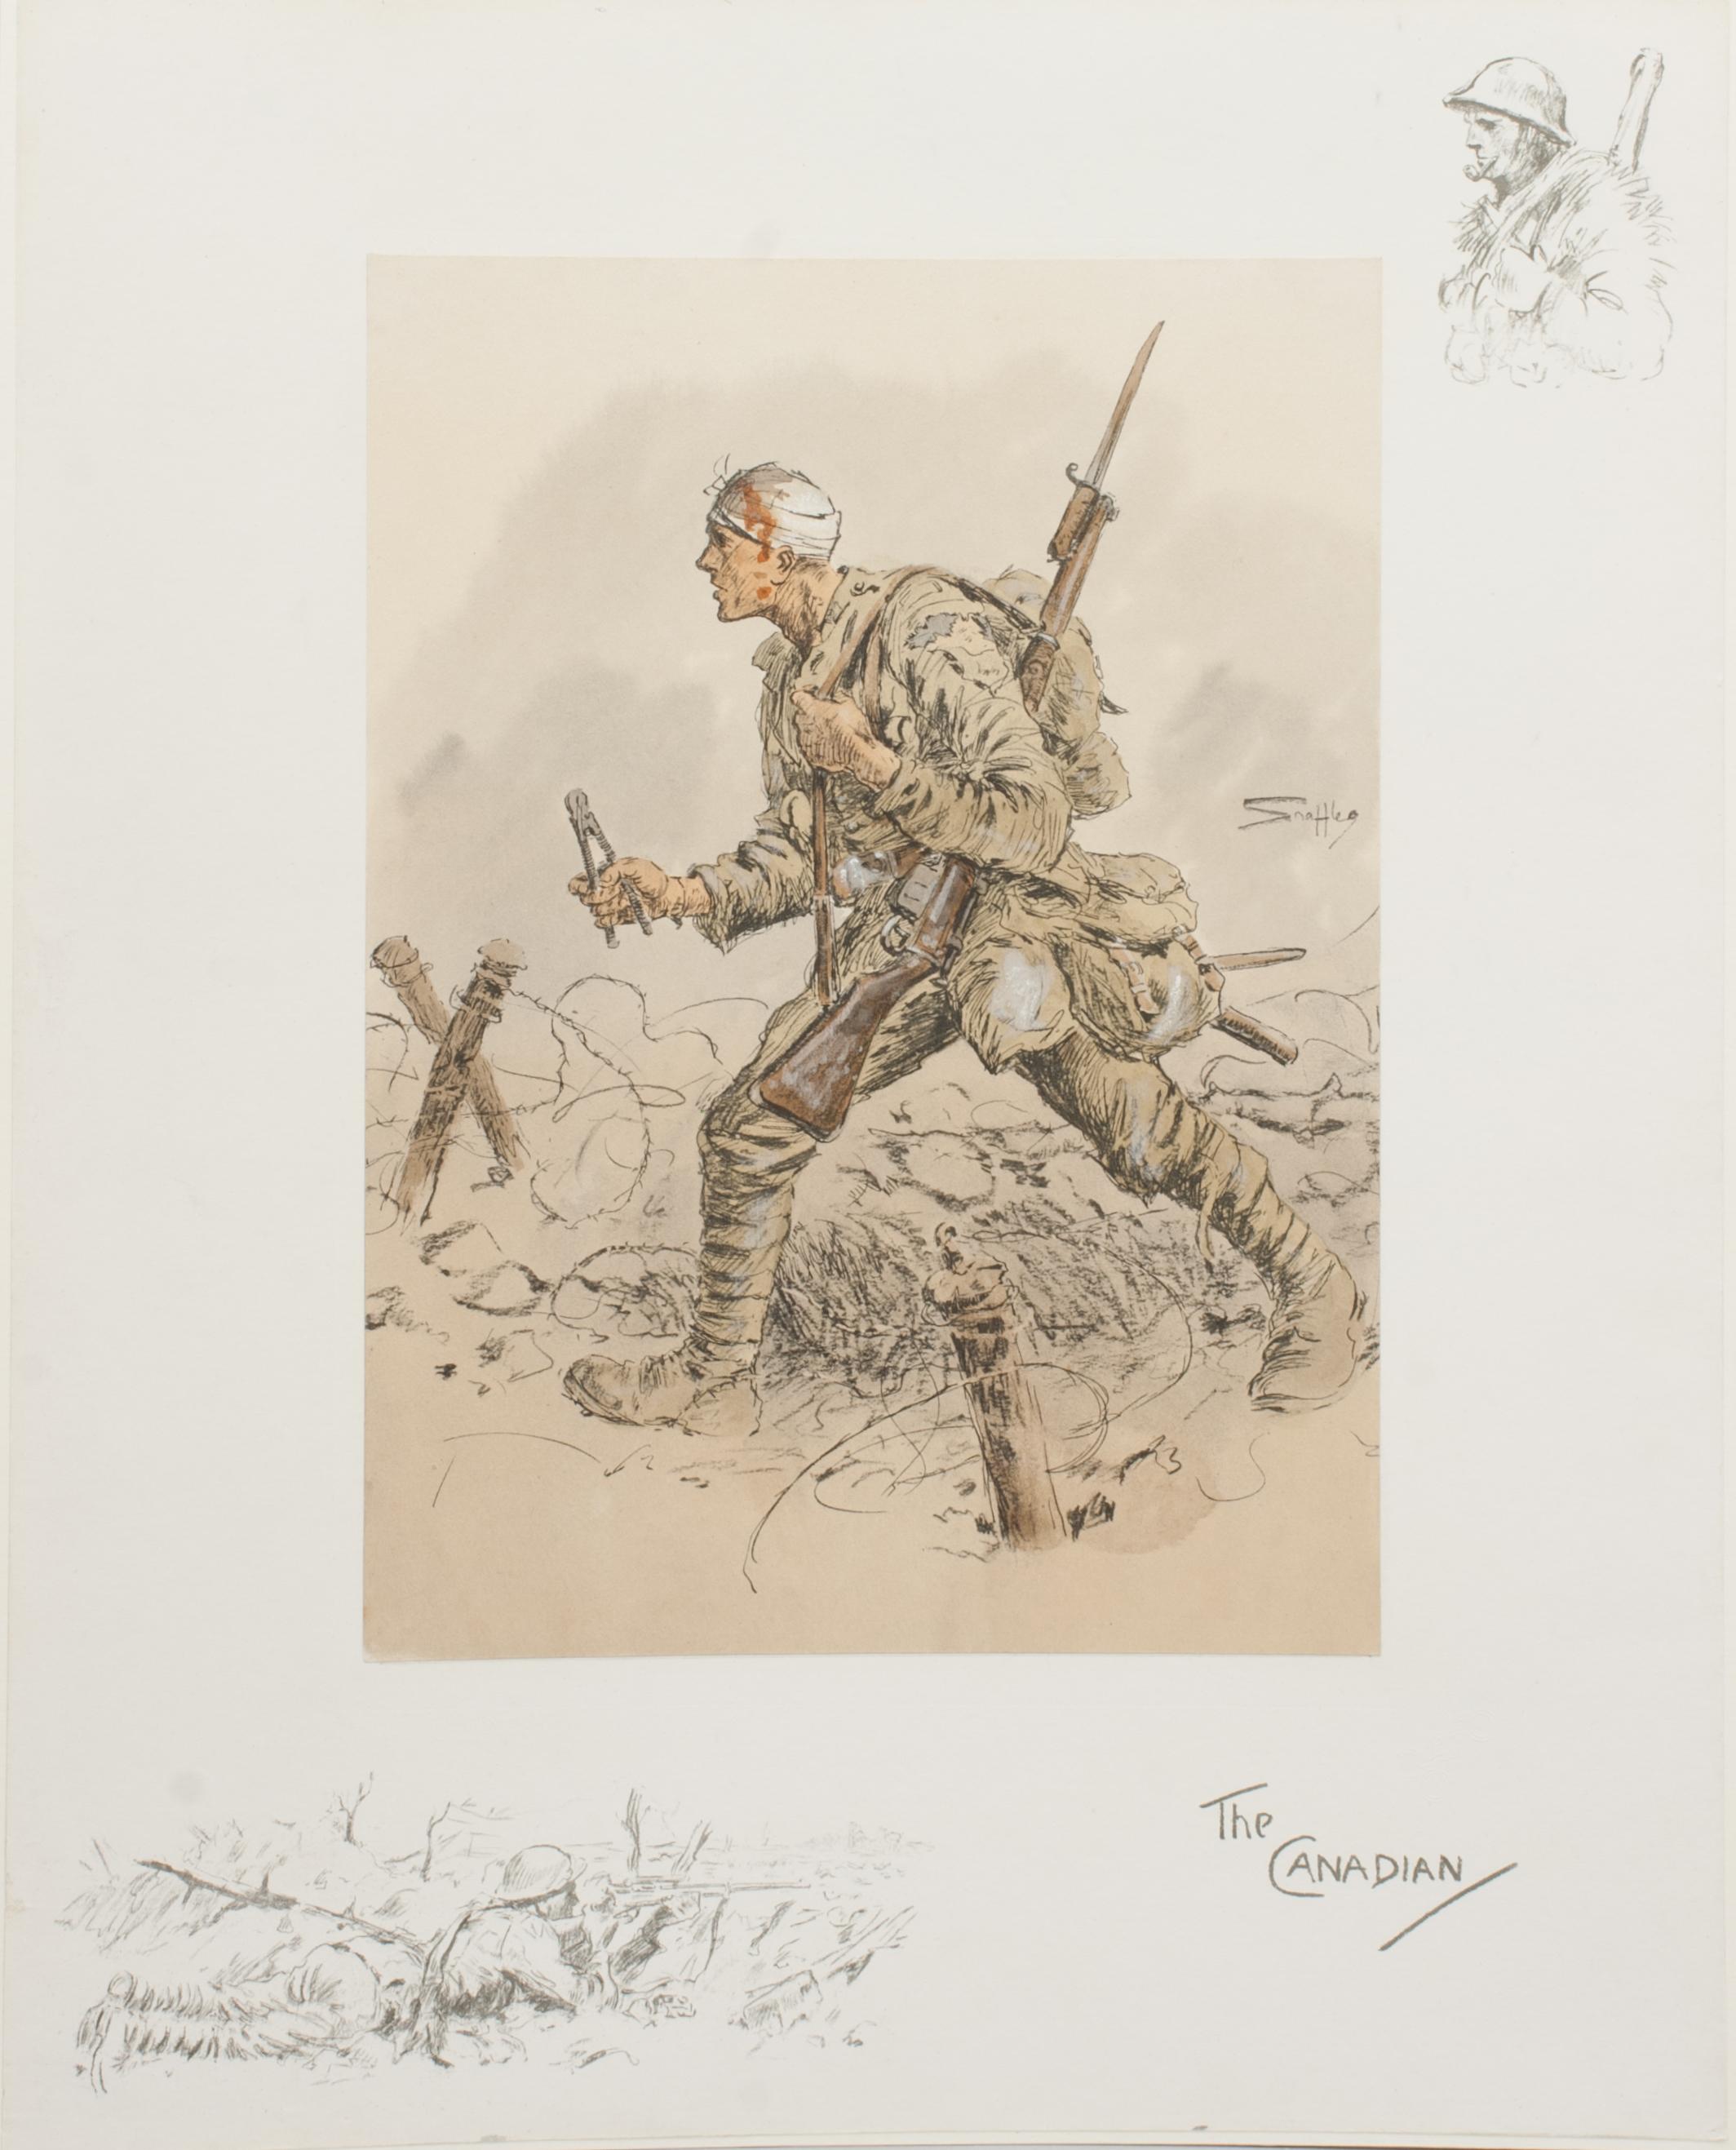 Vintage Snaffles WWI Military Print, The Canadian.
A good Snaffles WWI military print 'The Canadian', the main center colour-piece hand coloured lithograph is mounted onto the printed remarque board. The picture shows a wounded soldier charging